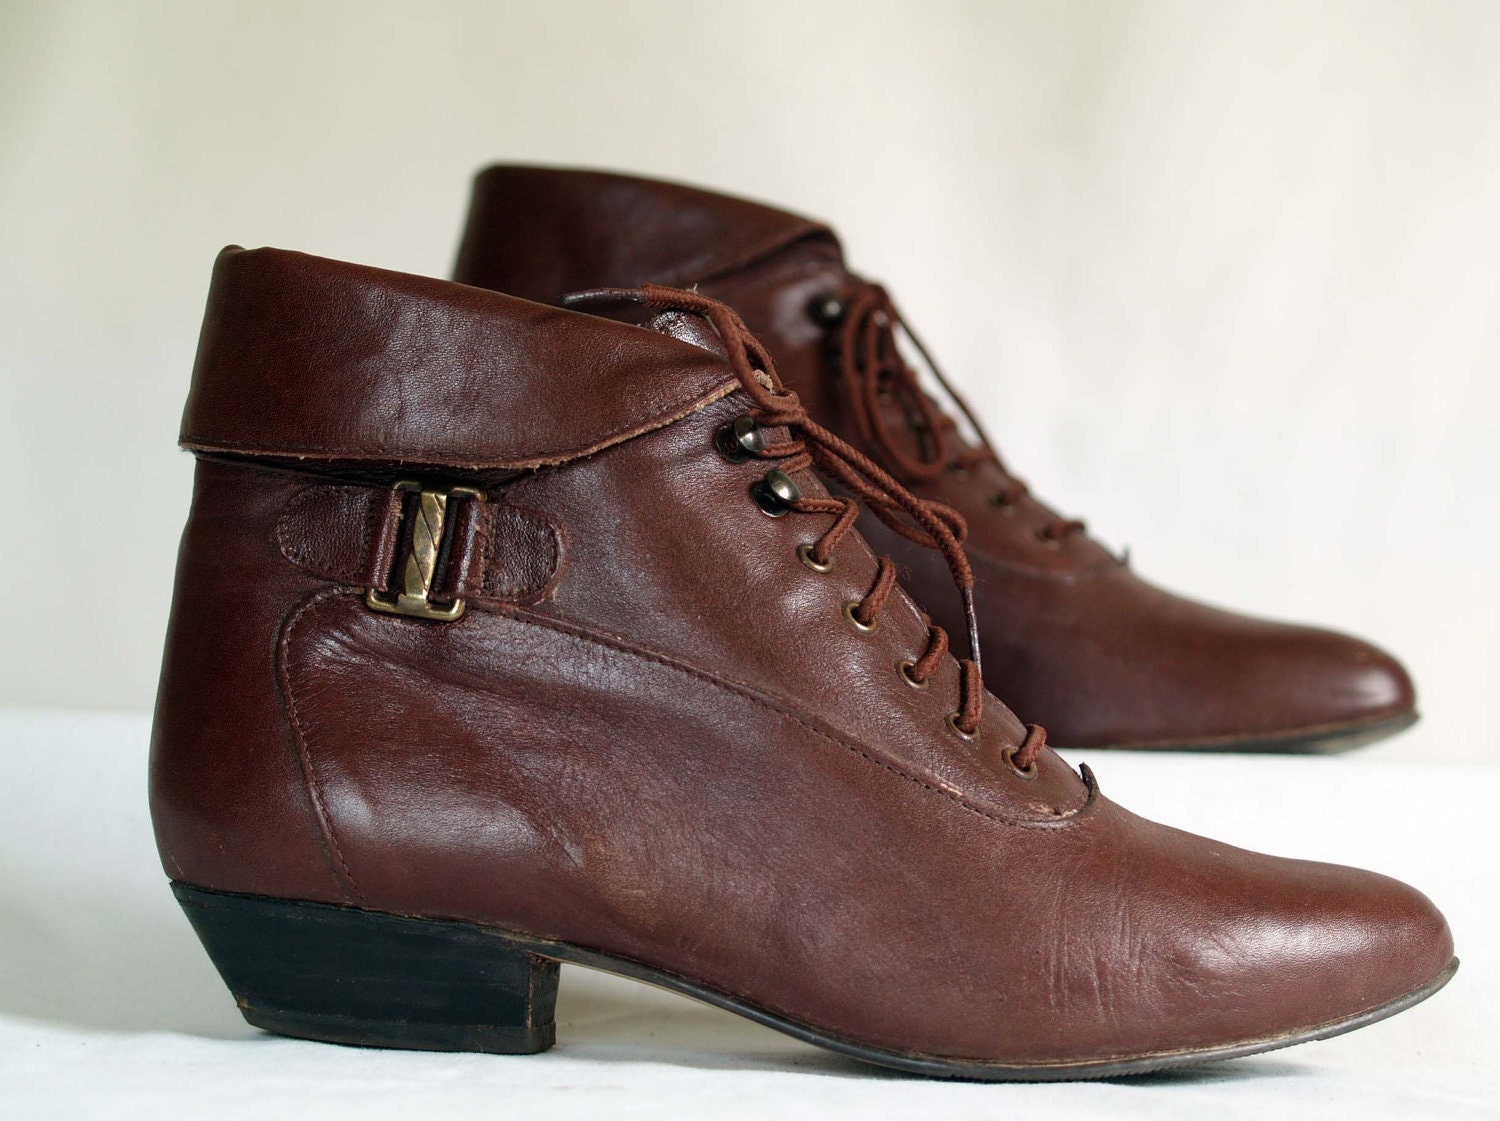 vintage ankle granny boots. fold down cuff. lace up hooks.